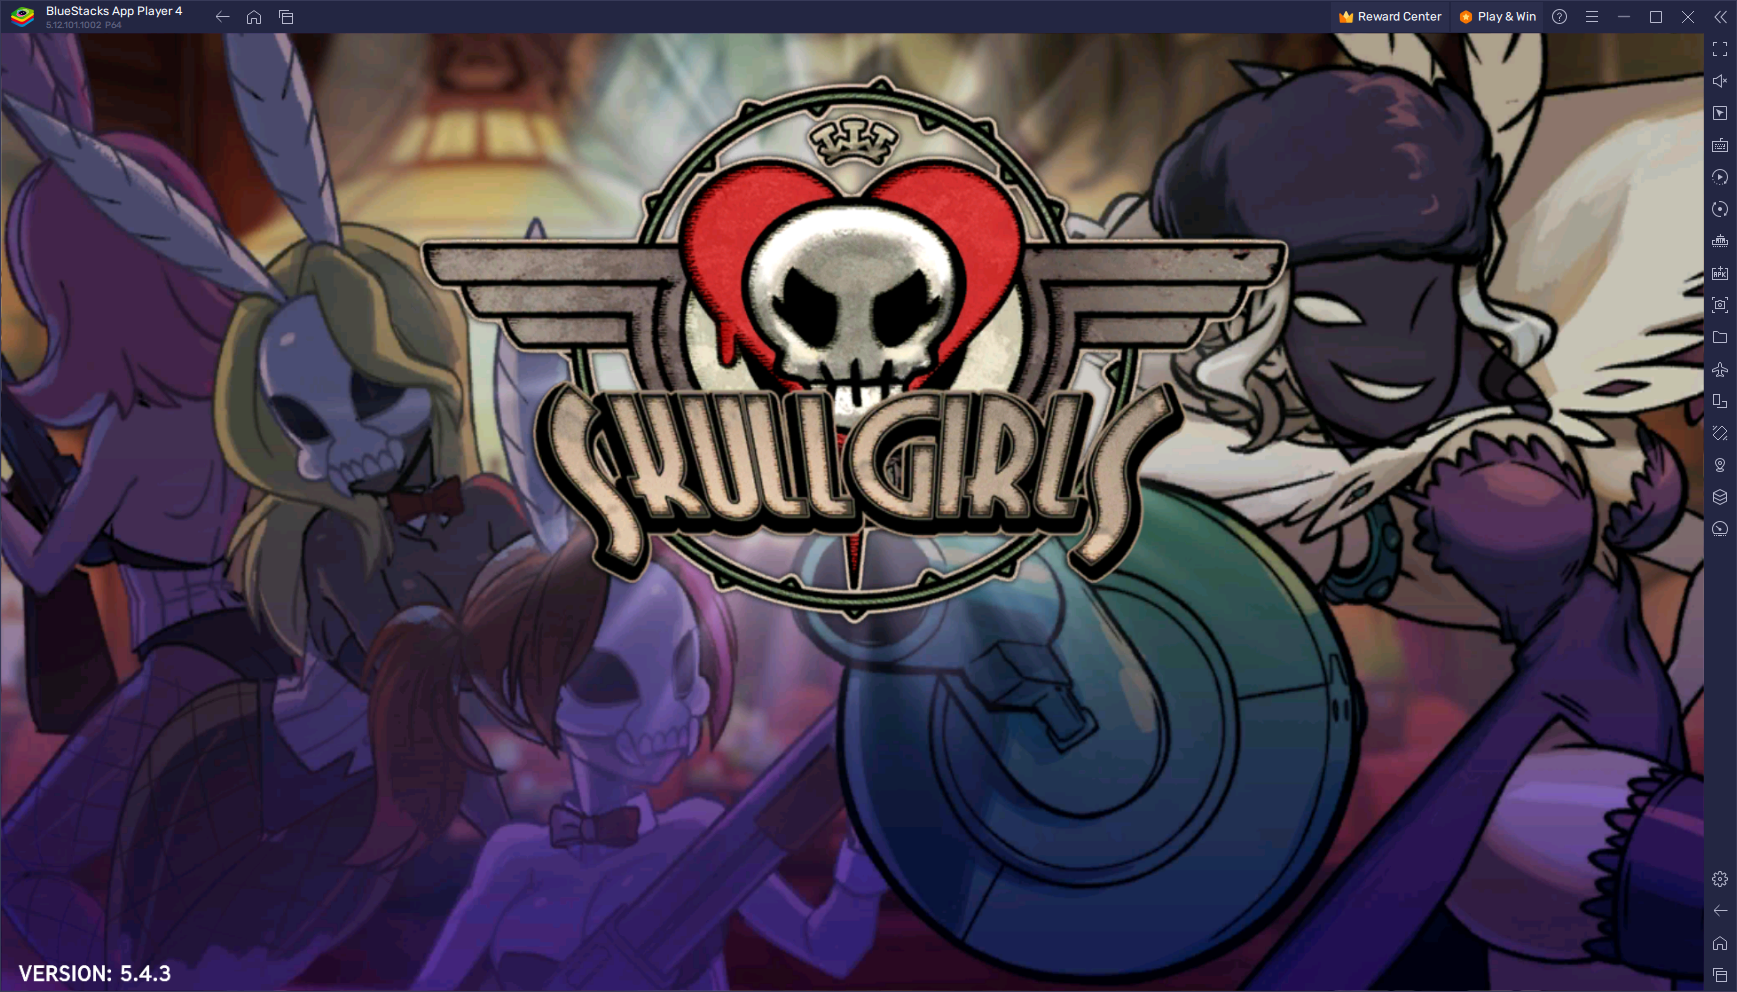 Skullgirls: Fighting RPG - New Character Marie Arriving This Month